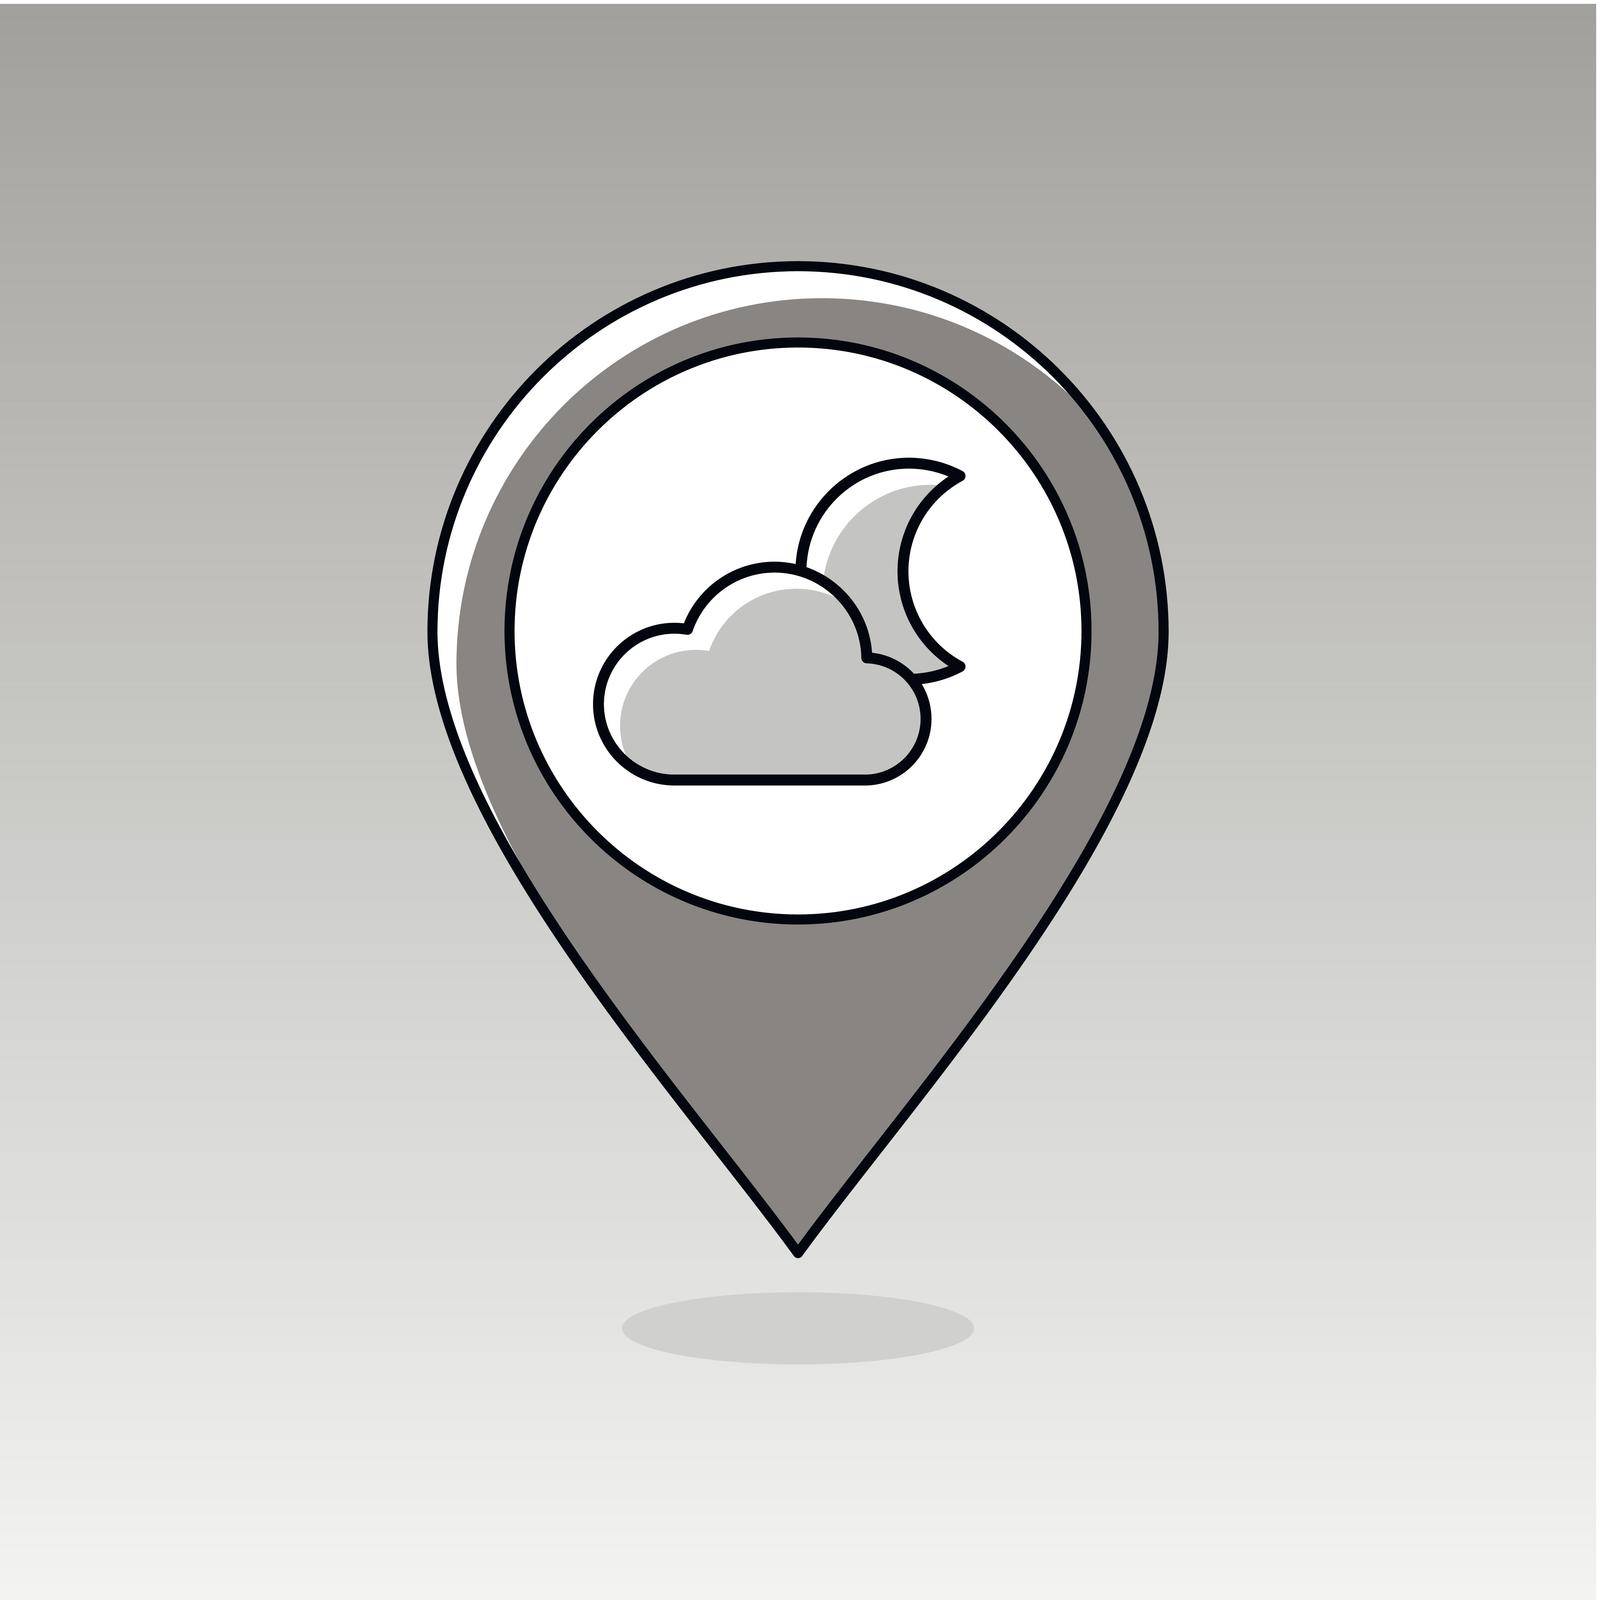 Cloud Moon outline pin map icon. Map pointer. Map markers. Sleep night dreams symbol. Meteorology. Weather. Vector illustration eps 10